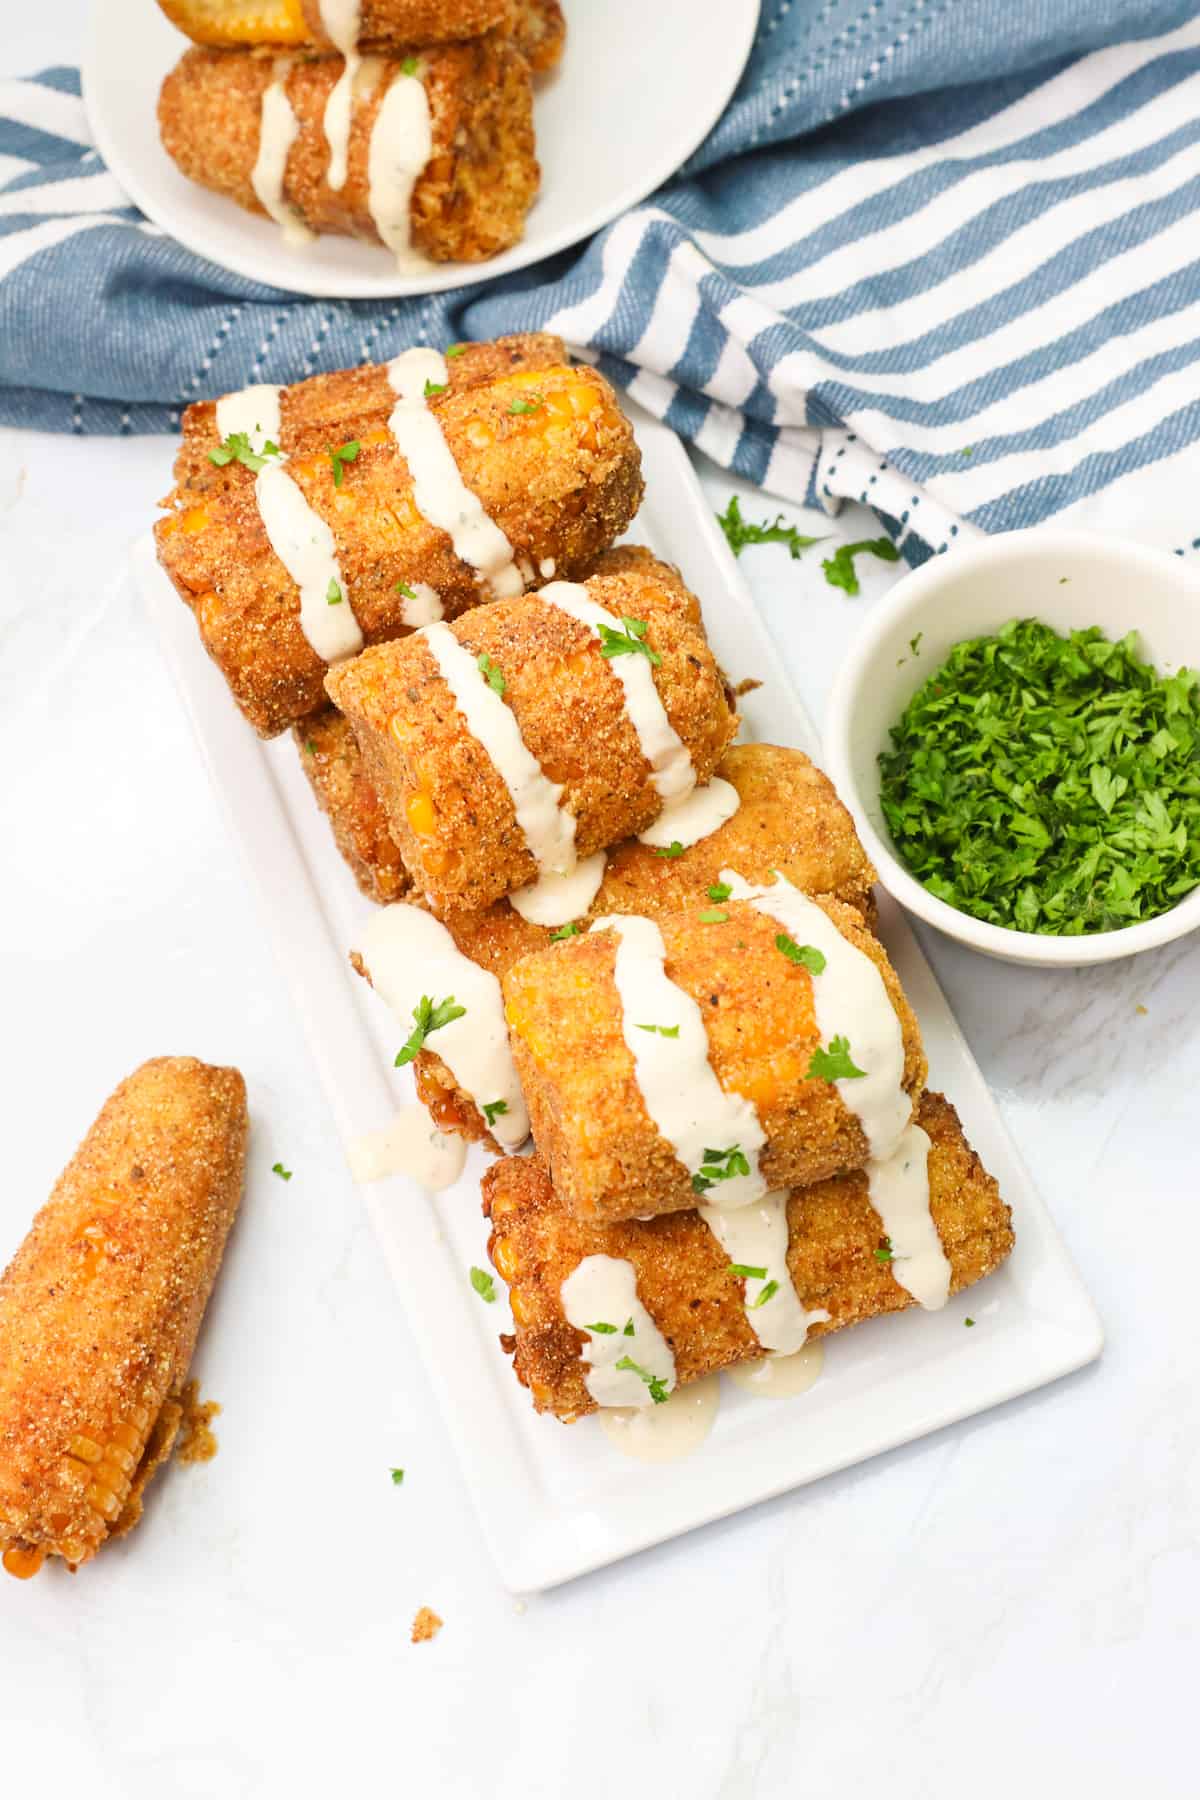 Homemade cajun fried corn on the cob with ranch dressing